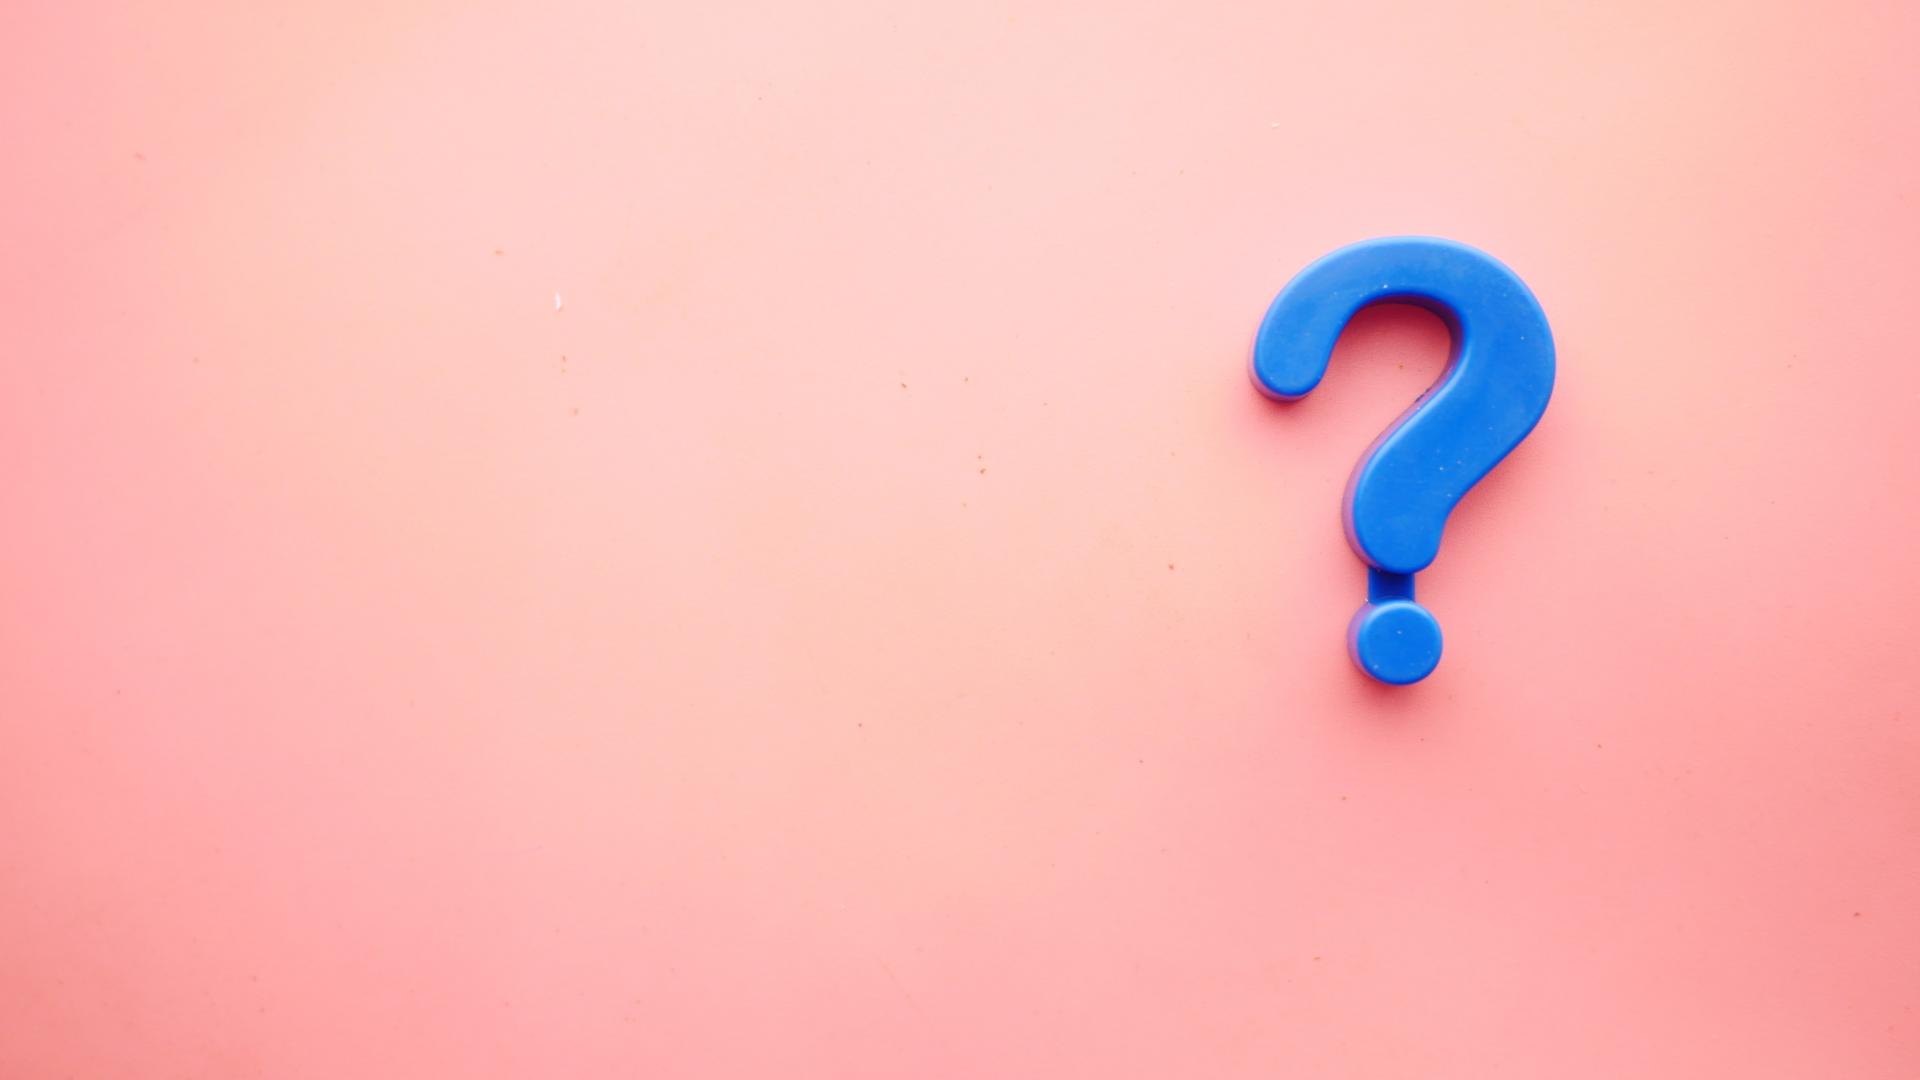 A blue question mark fridge magnet on a pink background